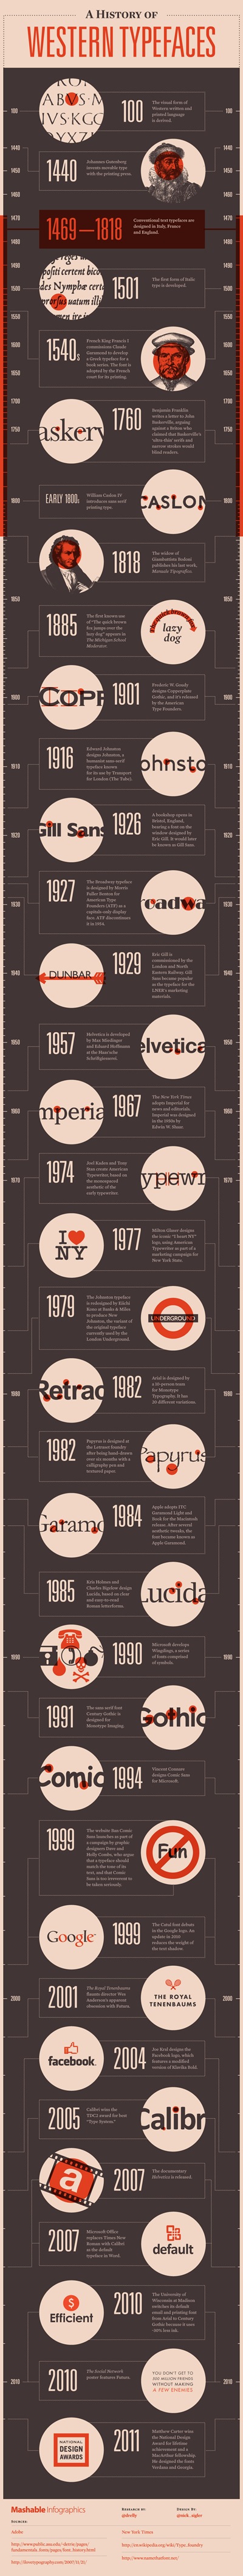 a-history-of-western-typefaces_5029116b9aa7b